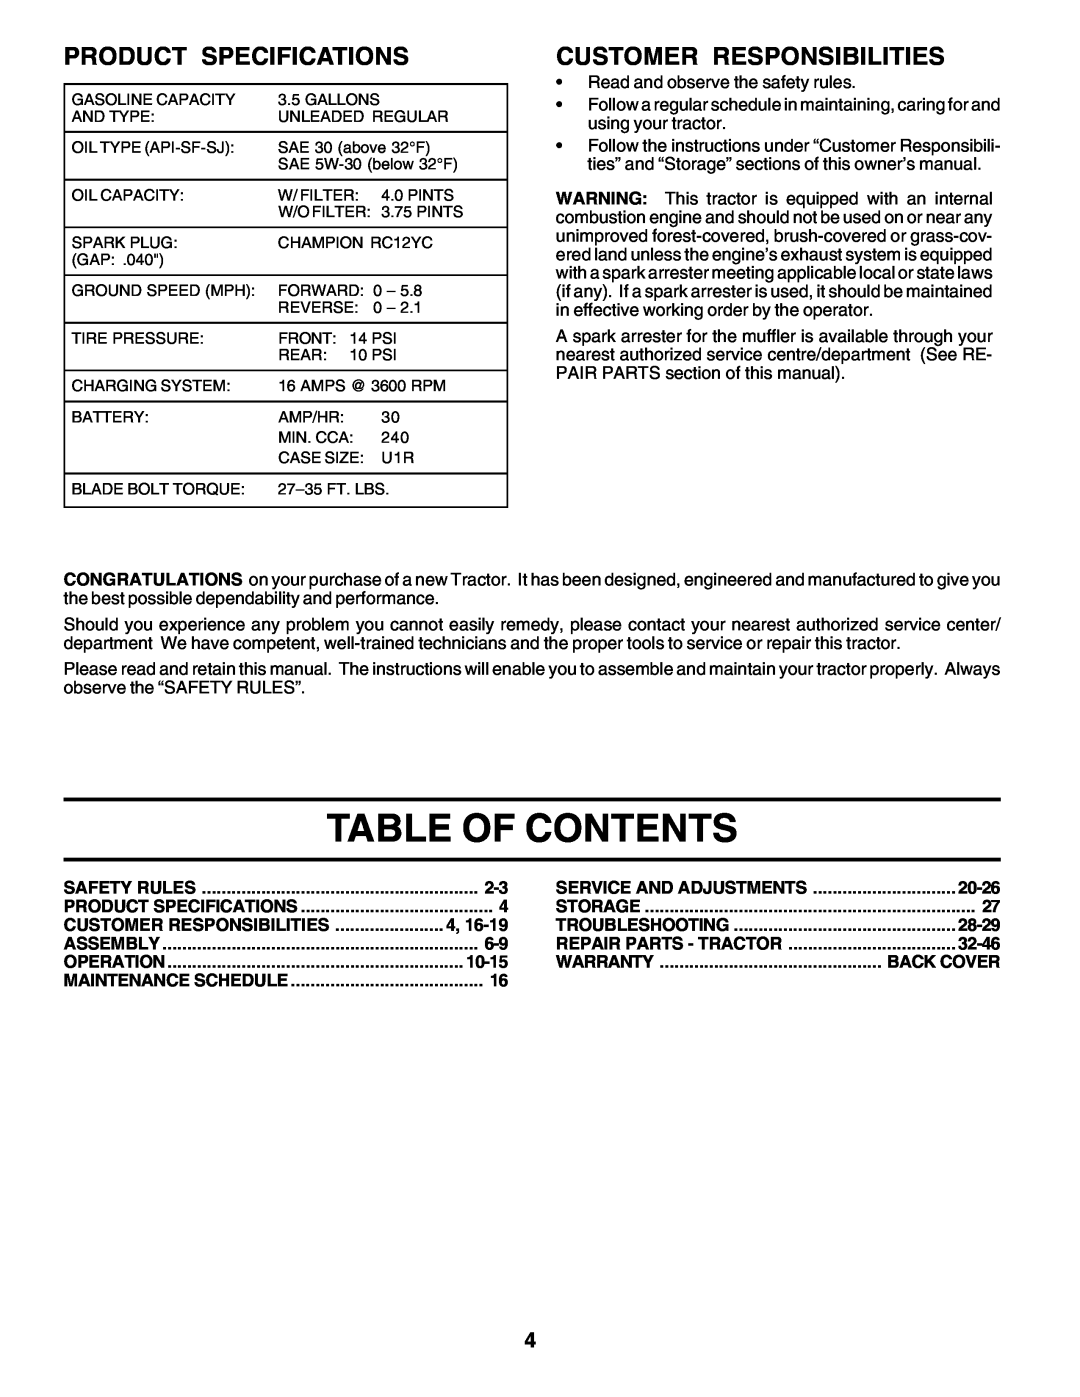 Poulan 176873 owner manual Table Of Contents, Product Specifications, Customer Responsibilities 